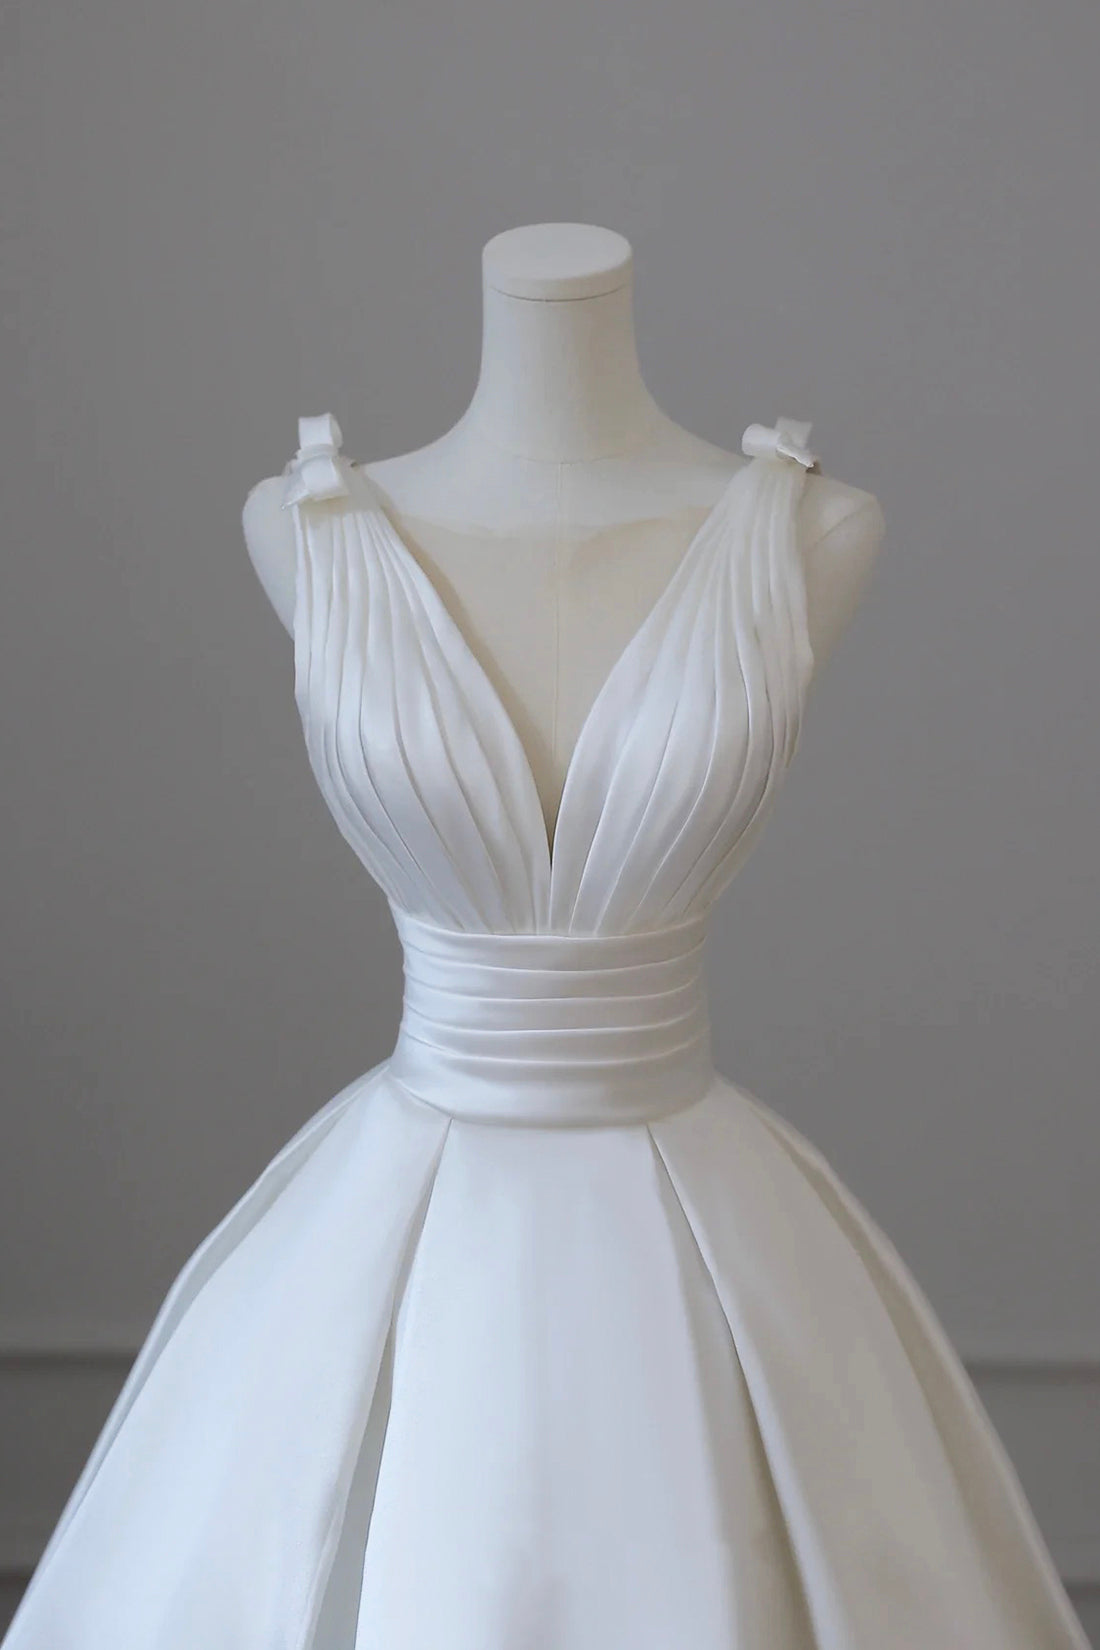 A-Line V-Neck Satin Wedding Dress, White Satin Bridal Gown with Bow